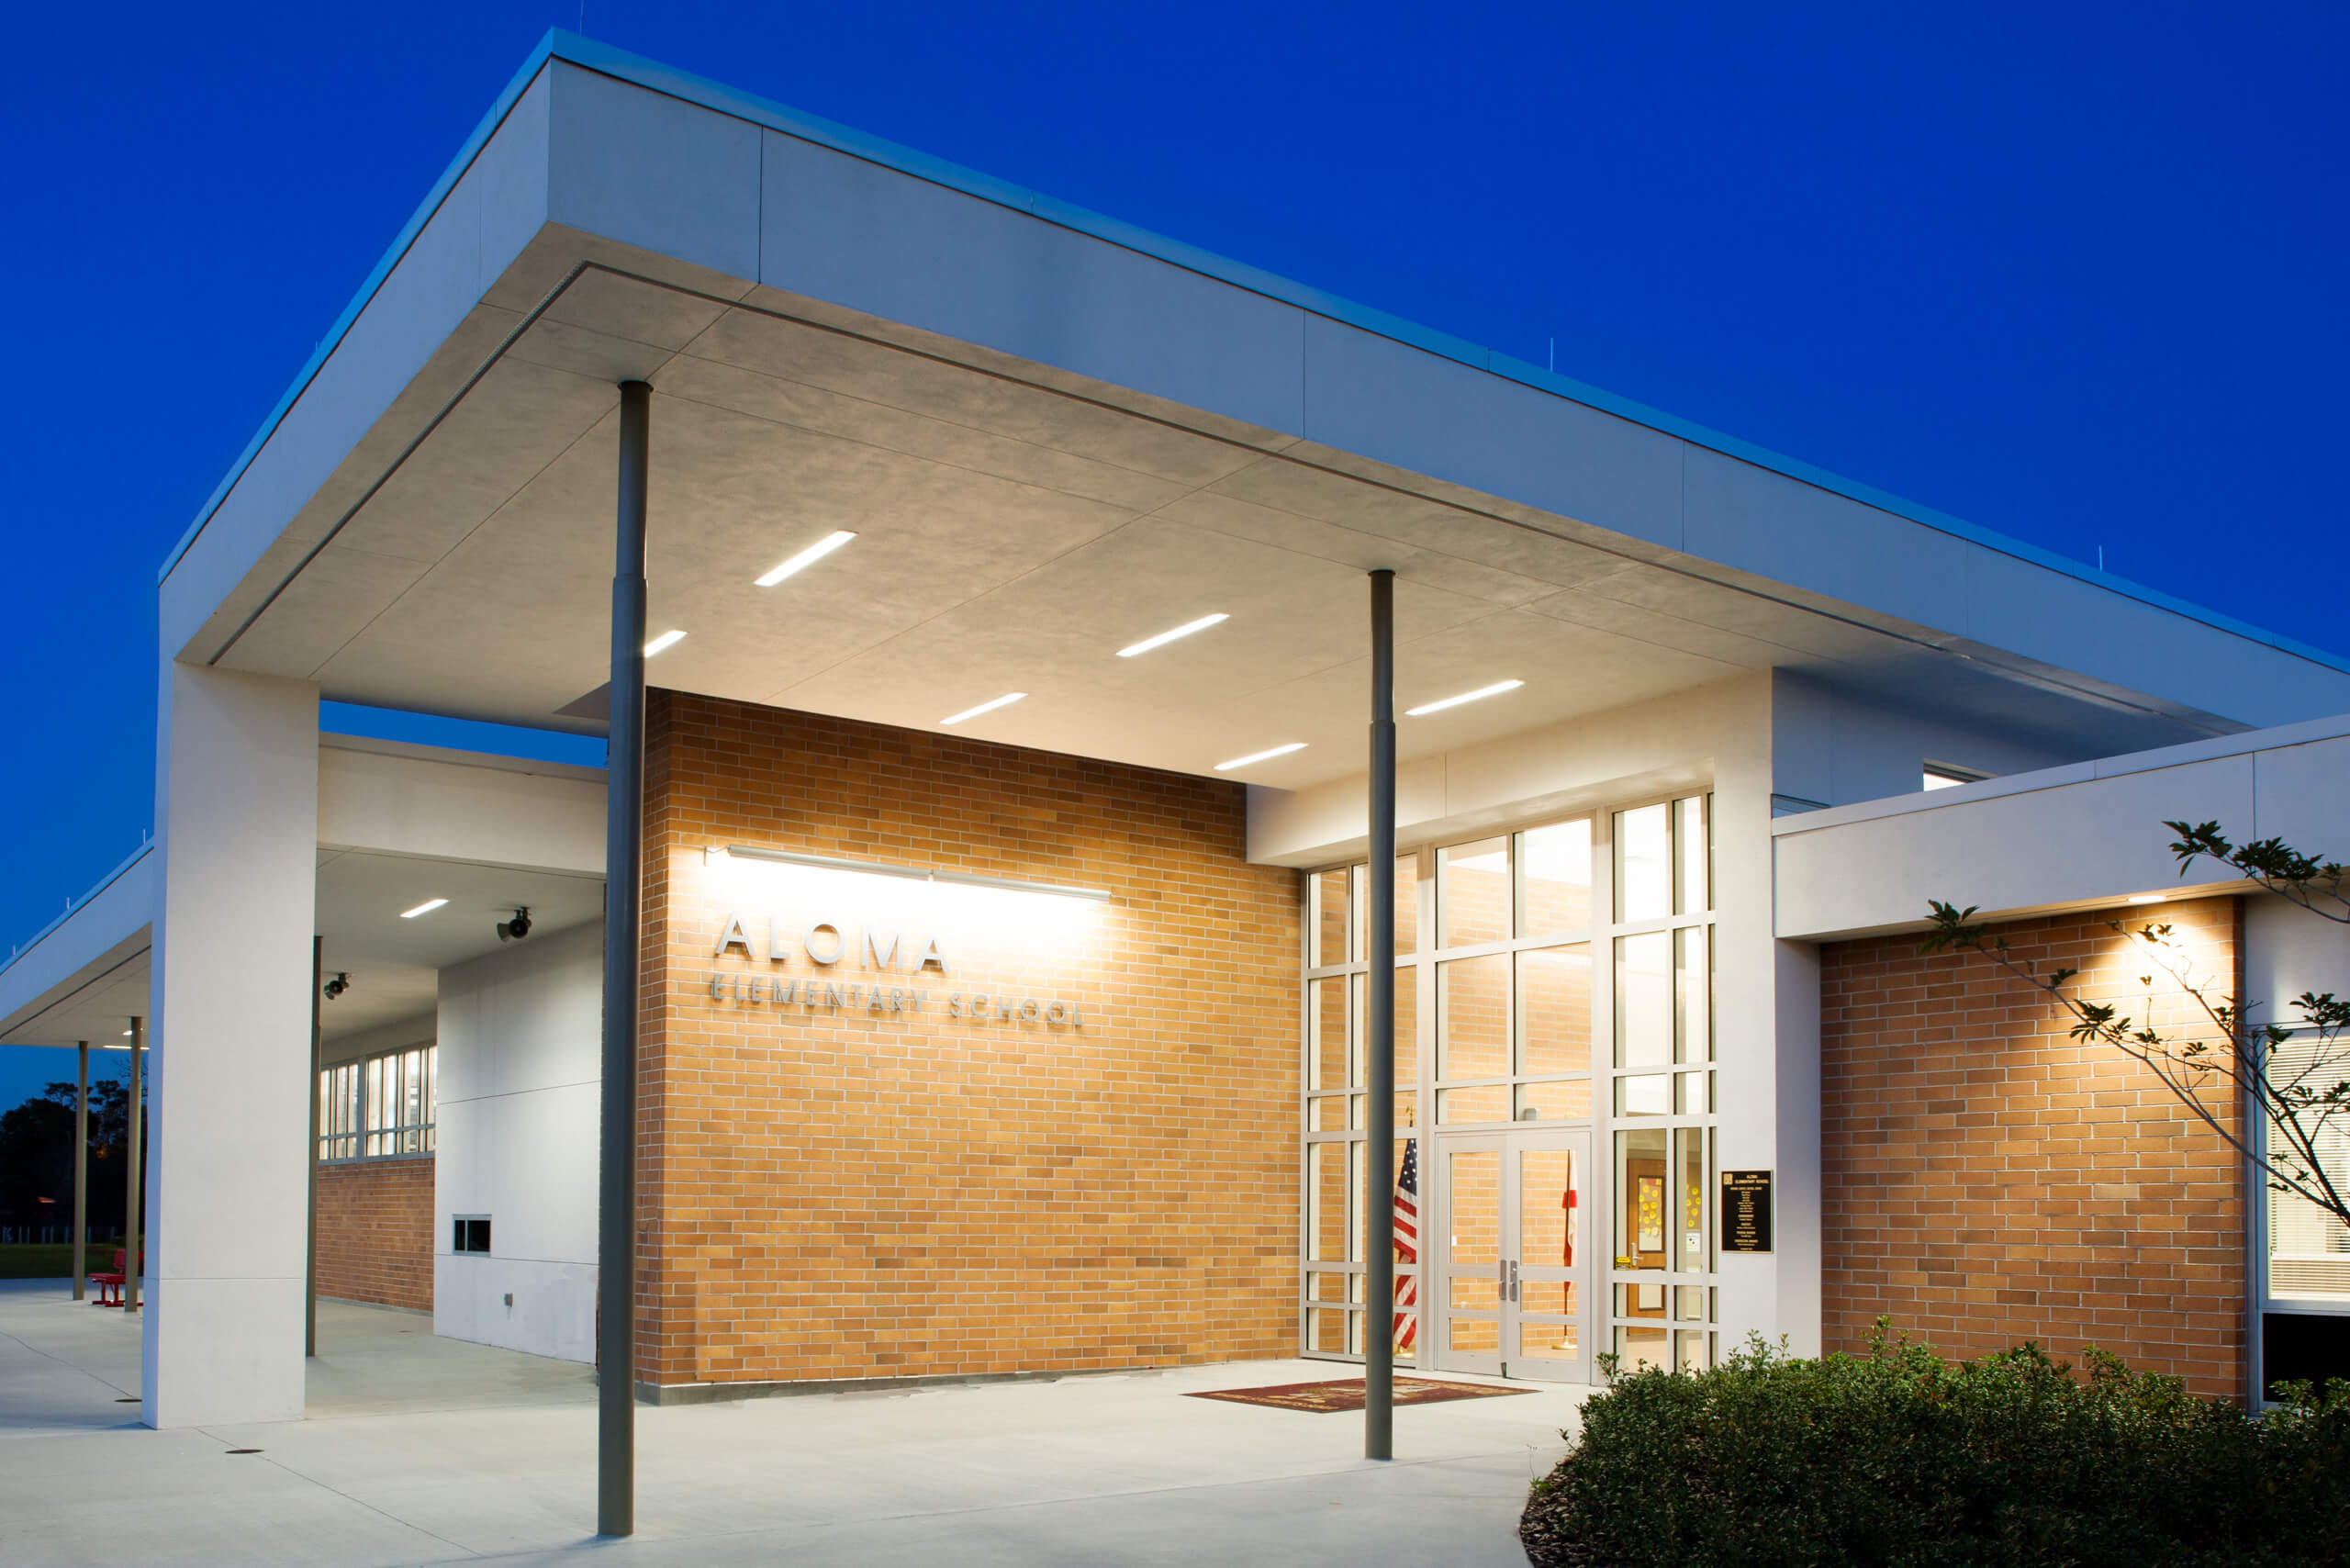 Aloma Elementary School Addition and Renovation